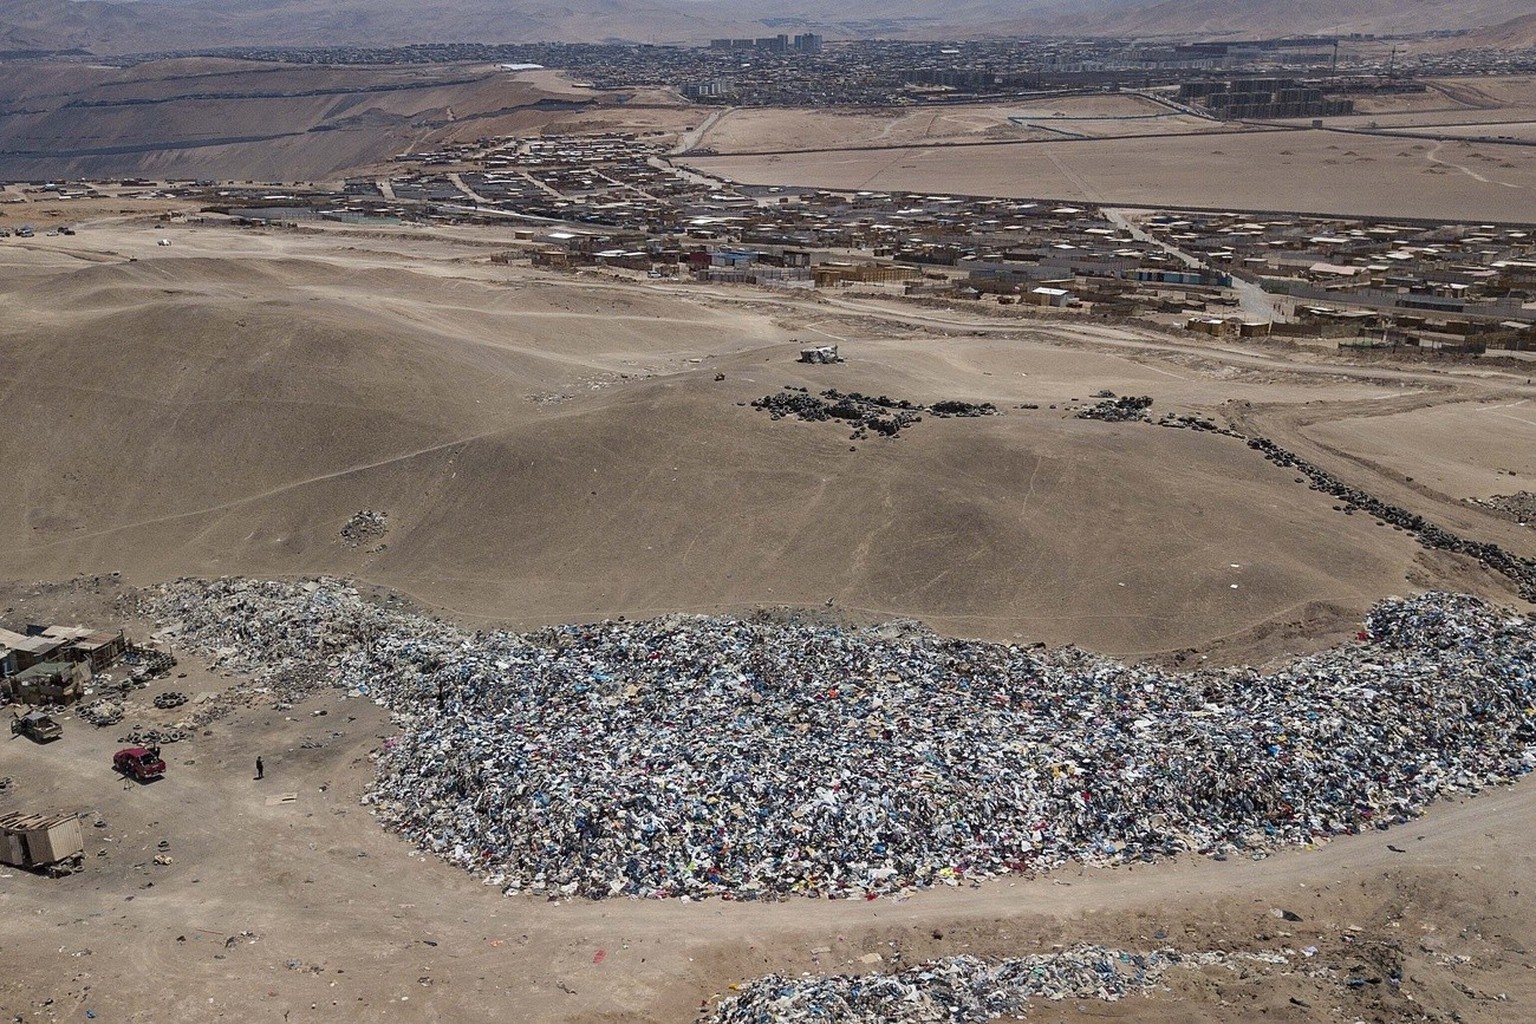 A large pile of second-hand clothing covers the sand near La Mula neighborhood in Alto Hospicio, Chile, Monday, Dec. 13, 2021. Chile is a big importer of second hand clothing, and unsold clothing gets ...